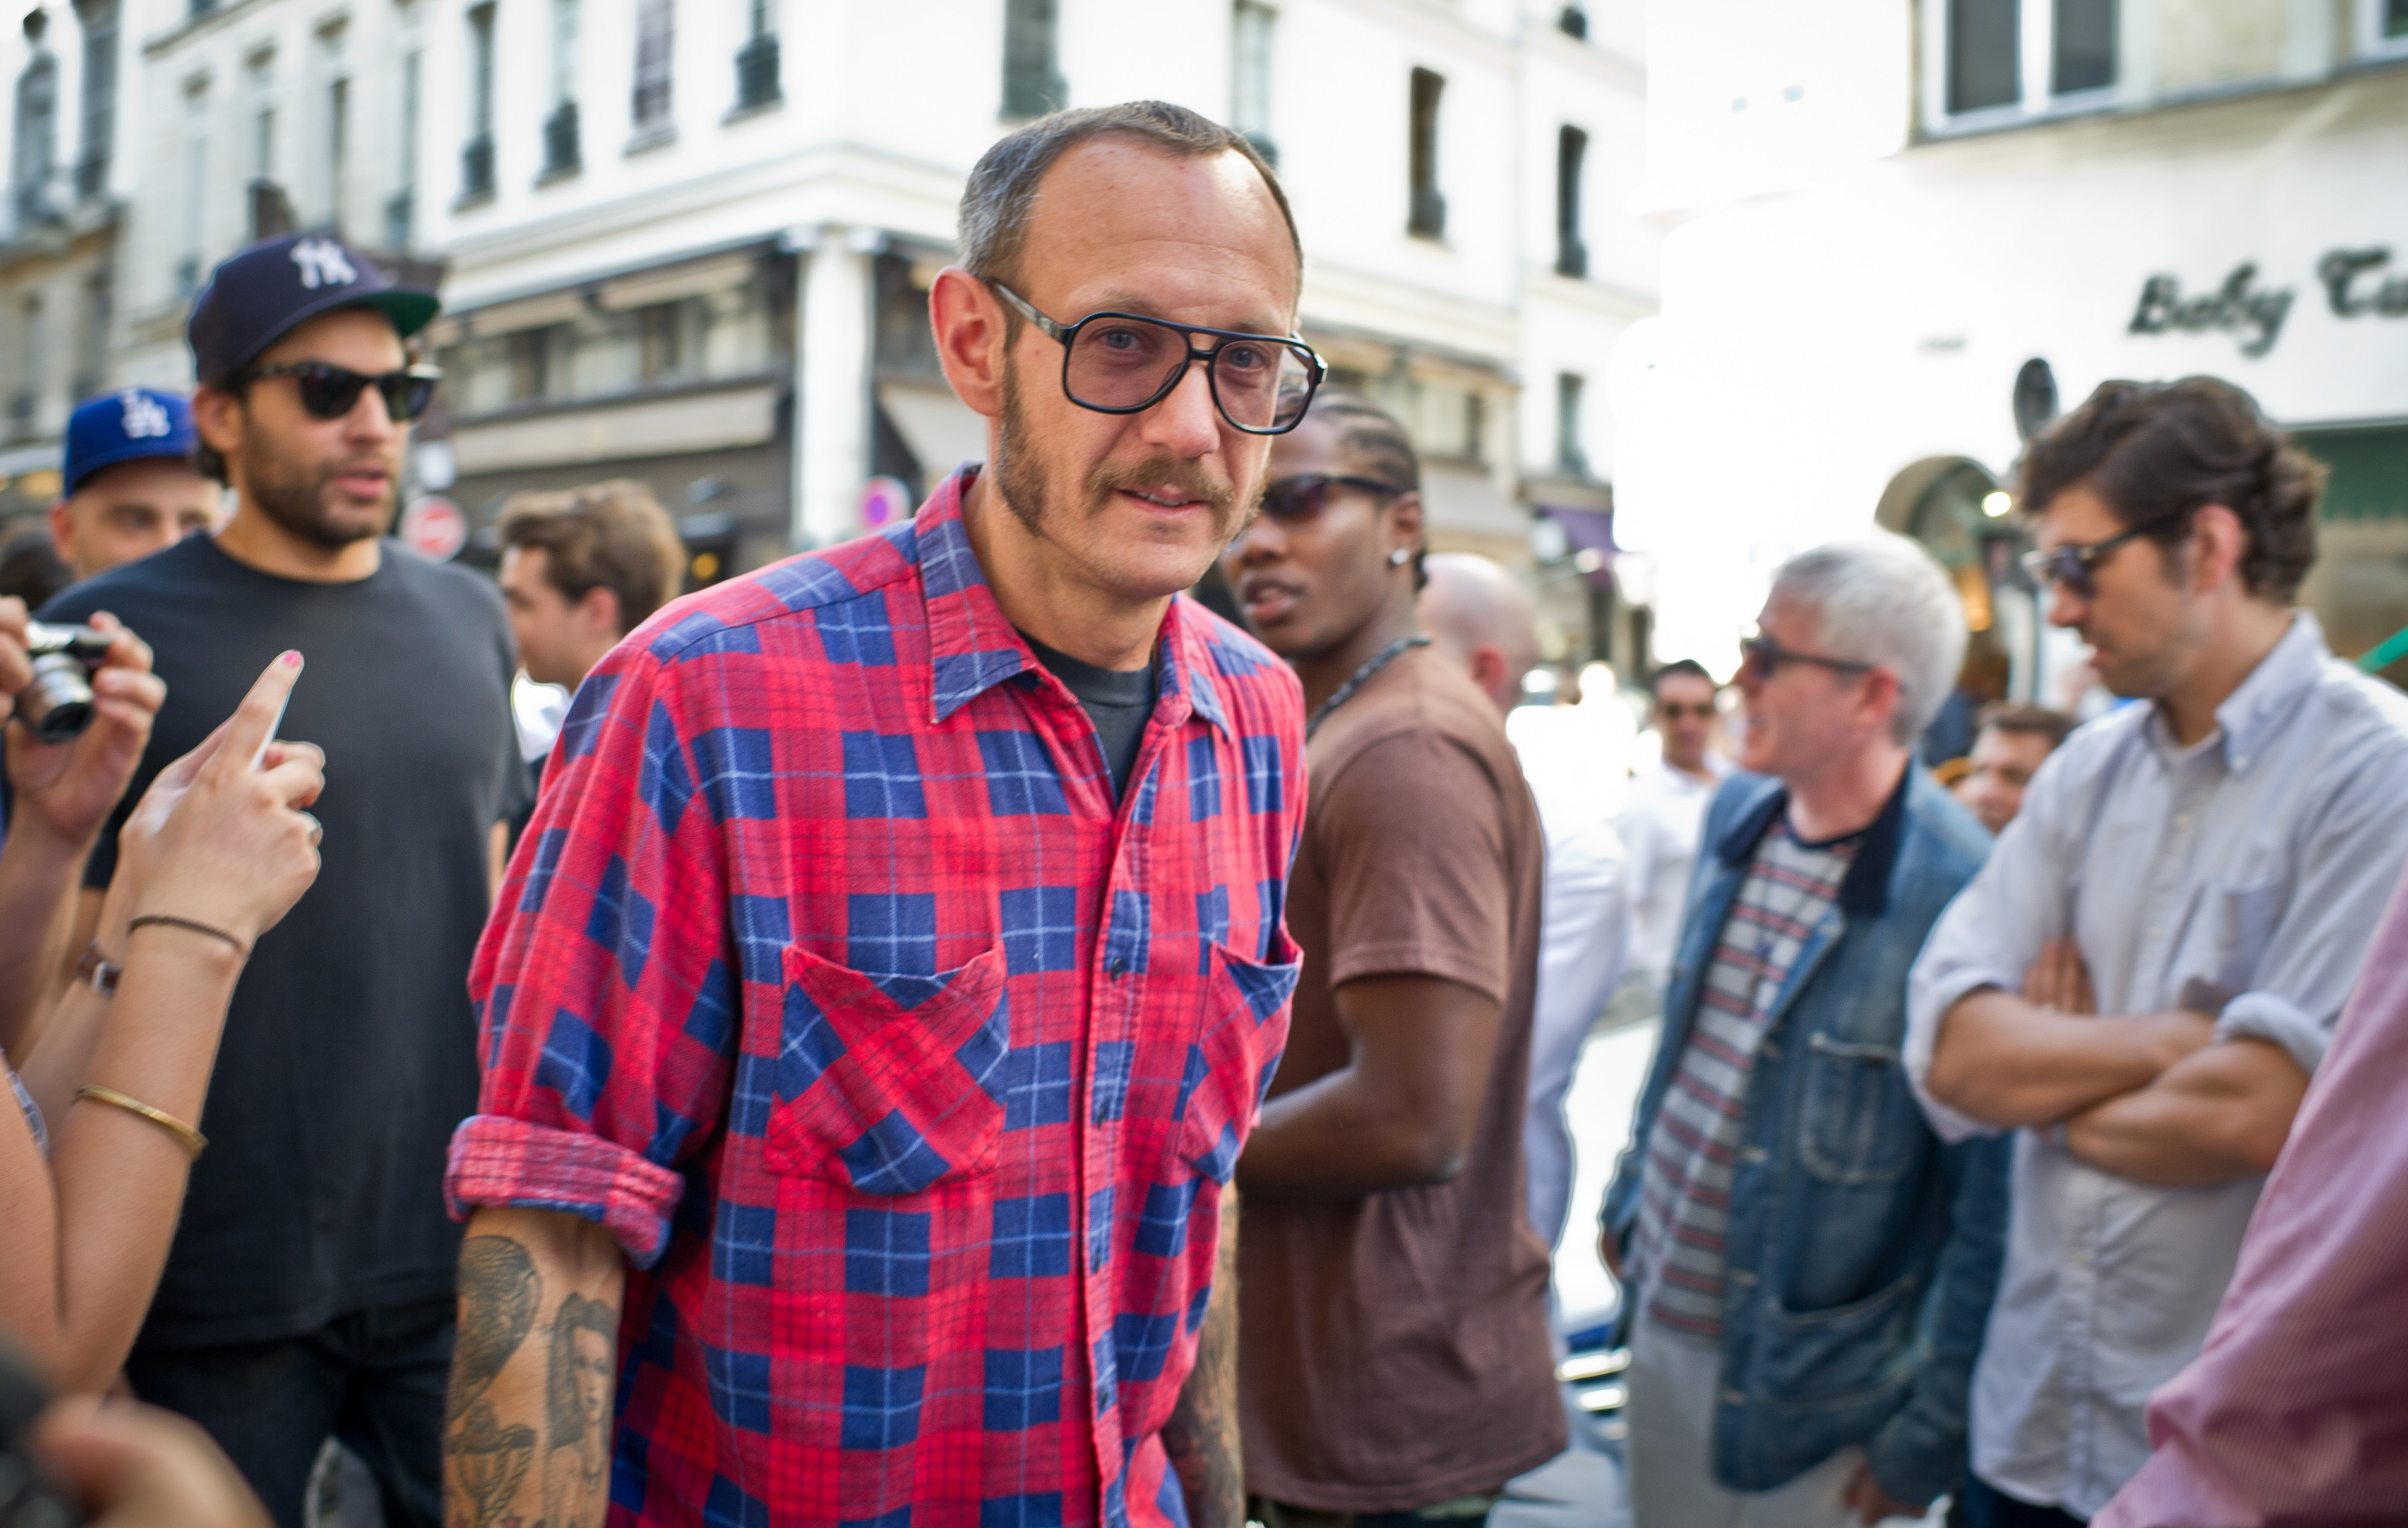 The Case Of Terry Richardson, And The Predatory Men Who Hide Behind Art HuffPost Entertainment